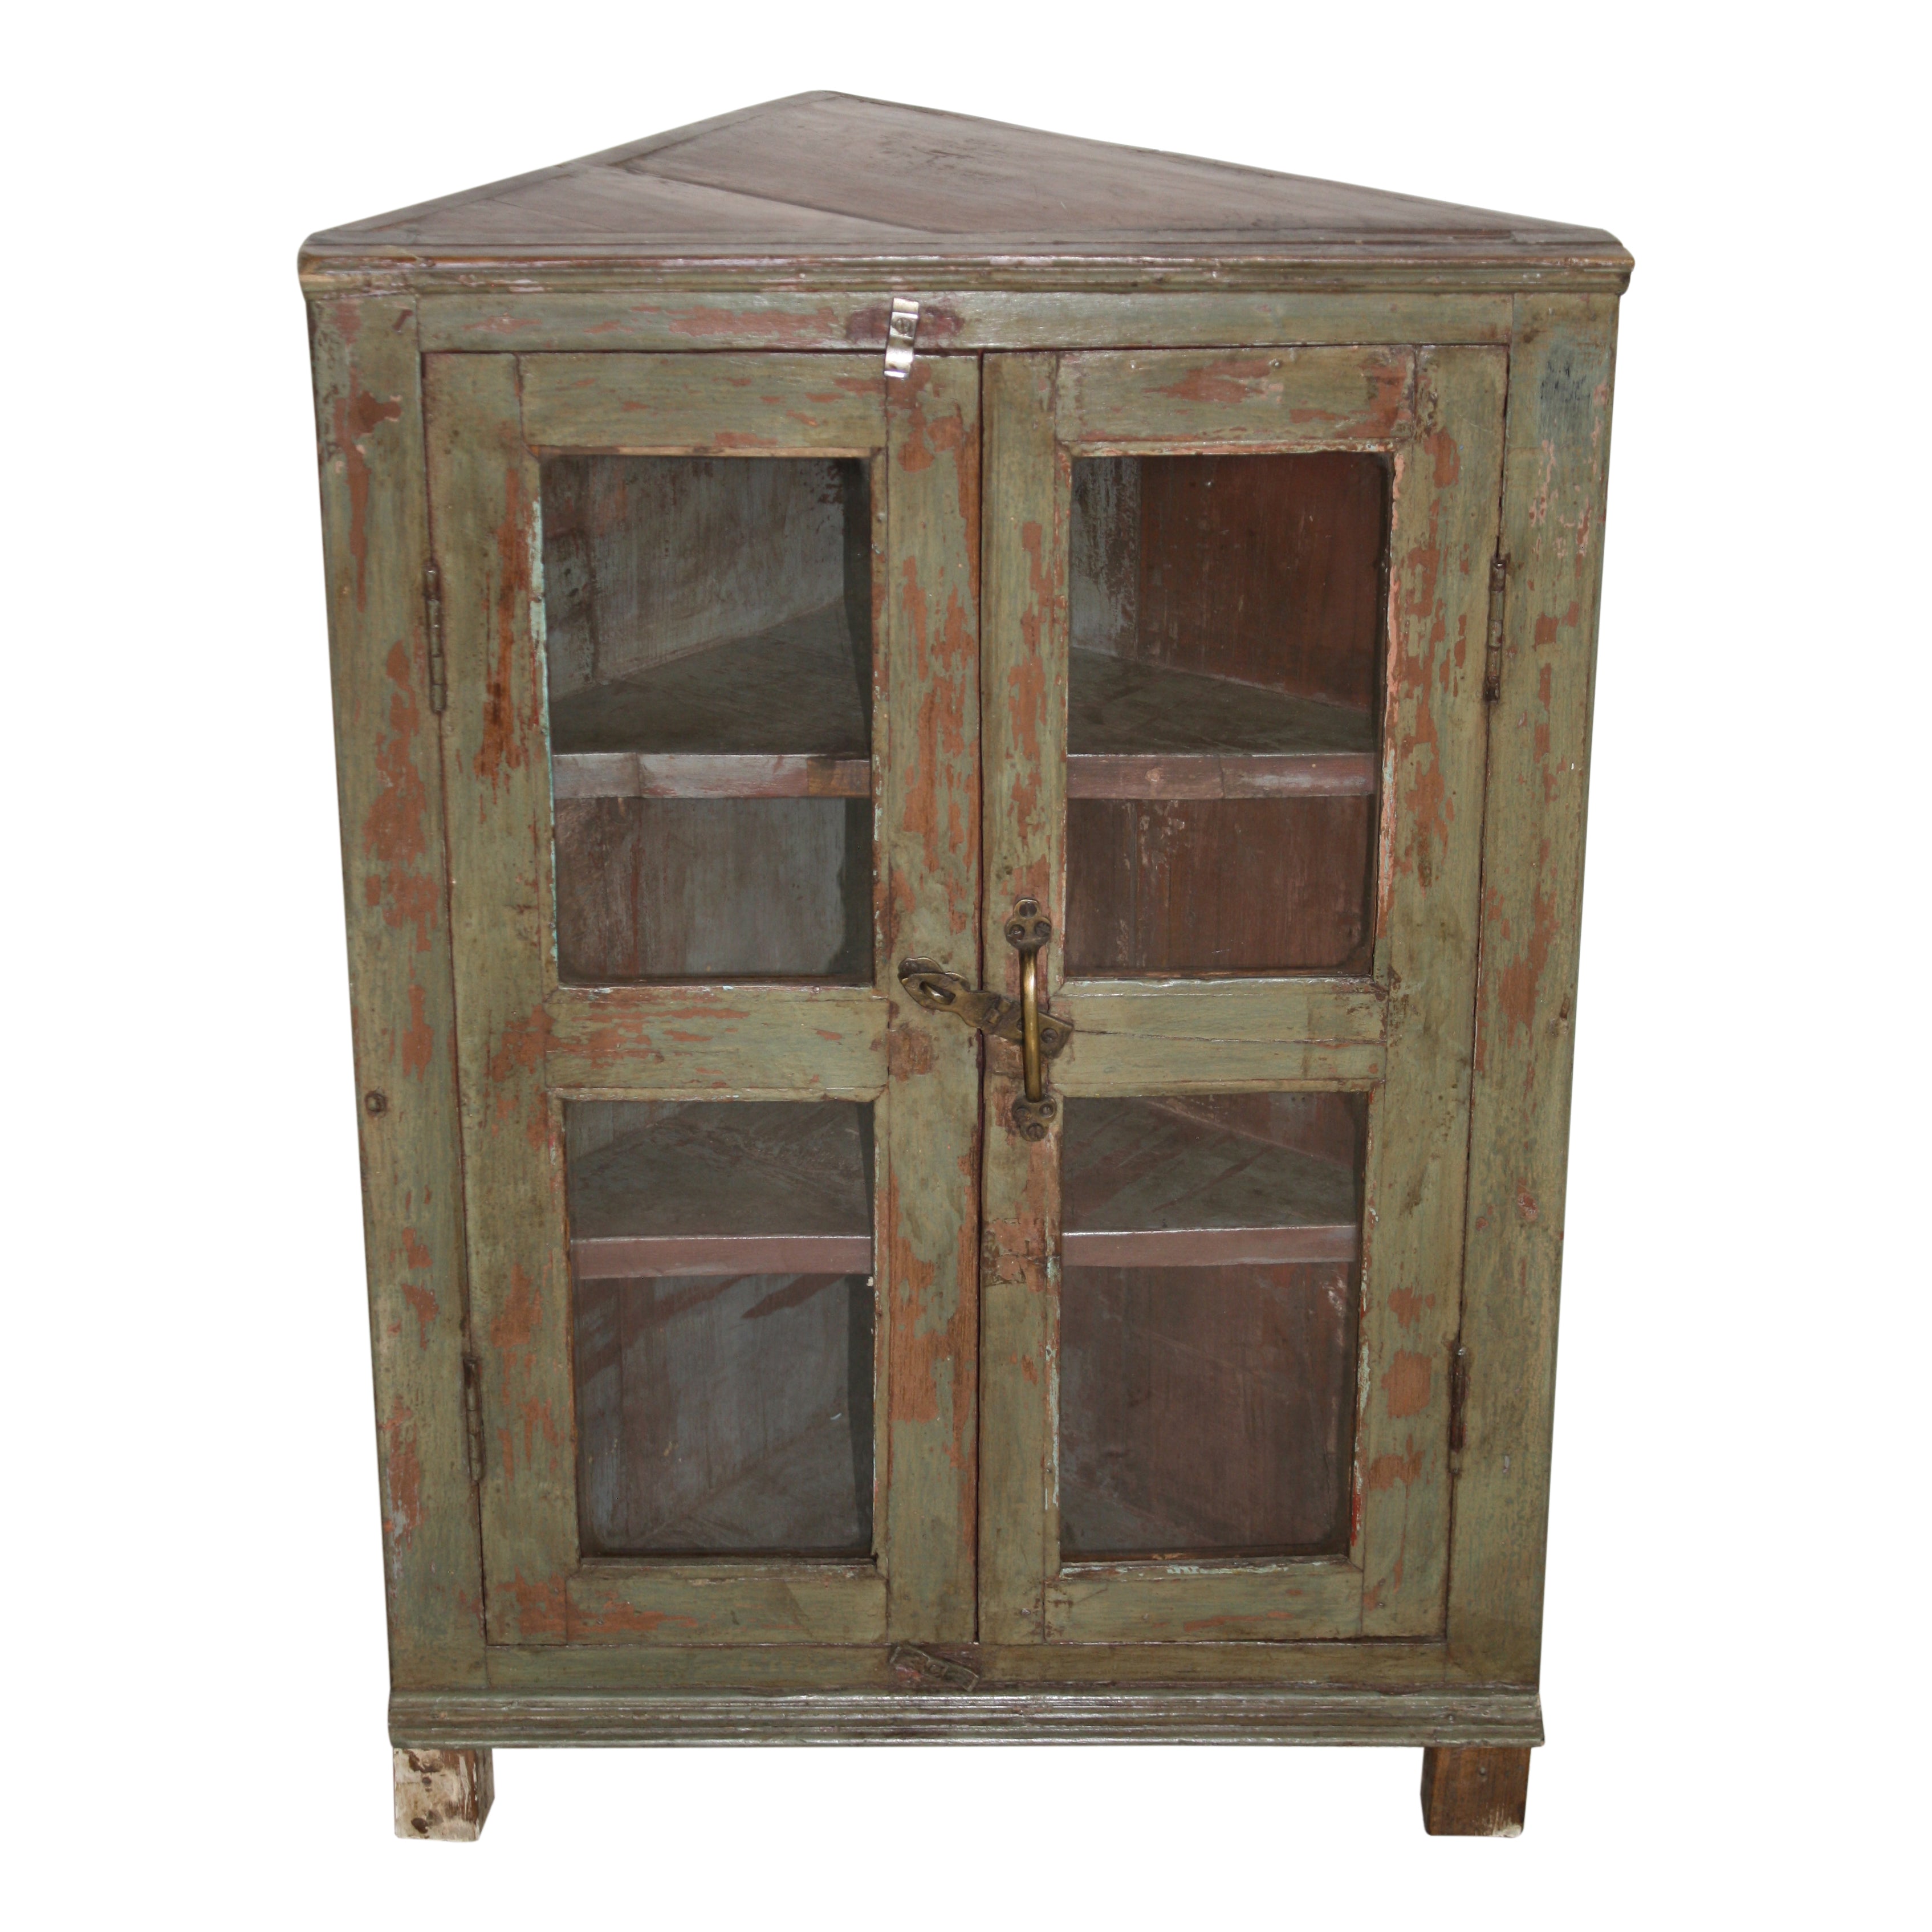 Short Painted Corner Cabinet with Glass Doors